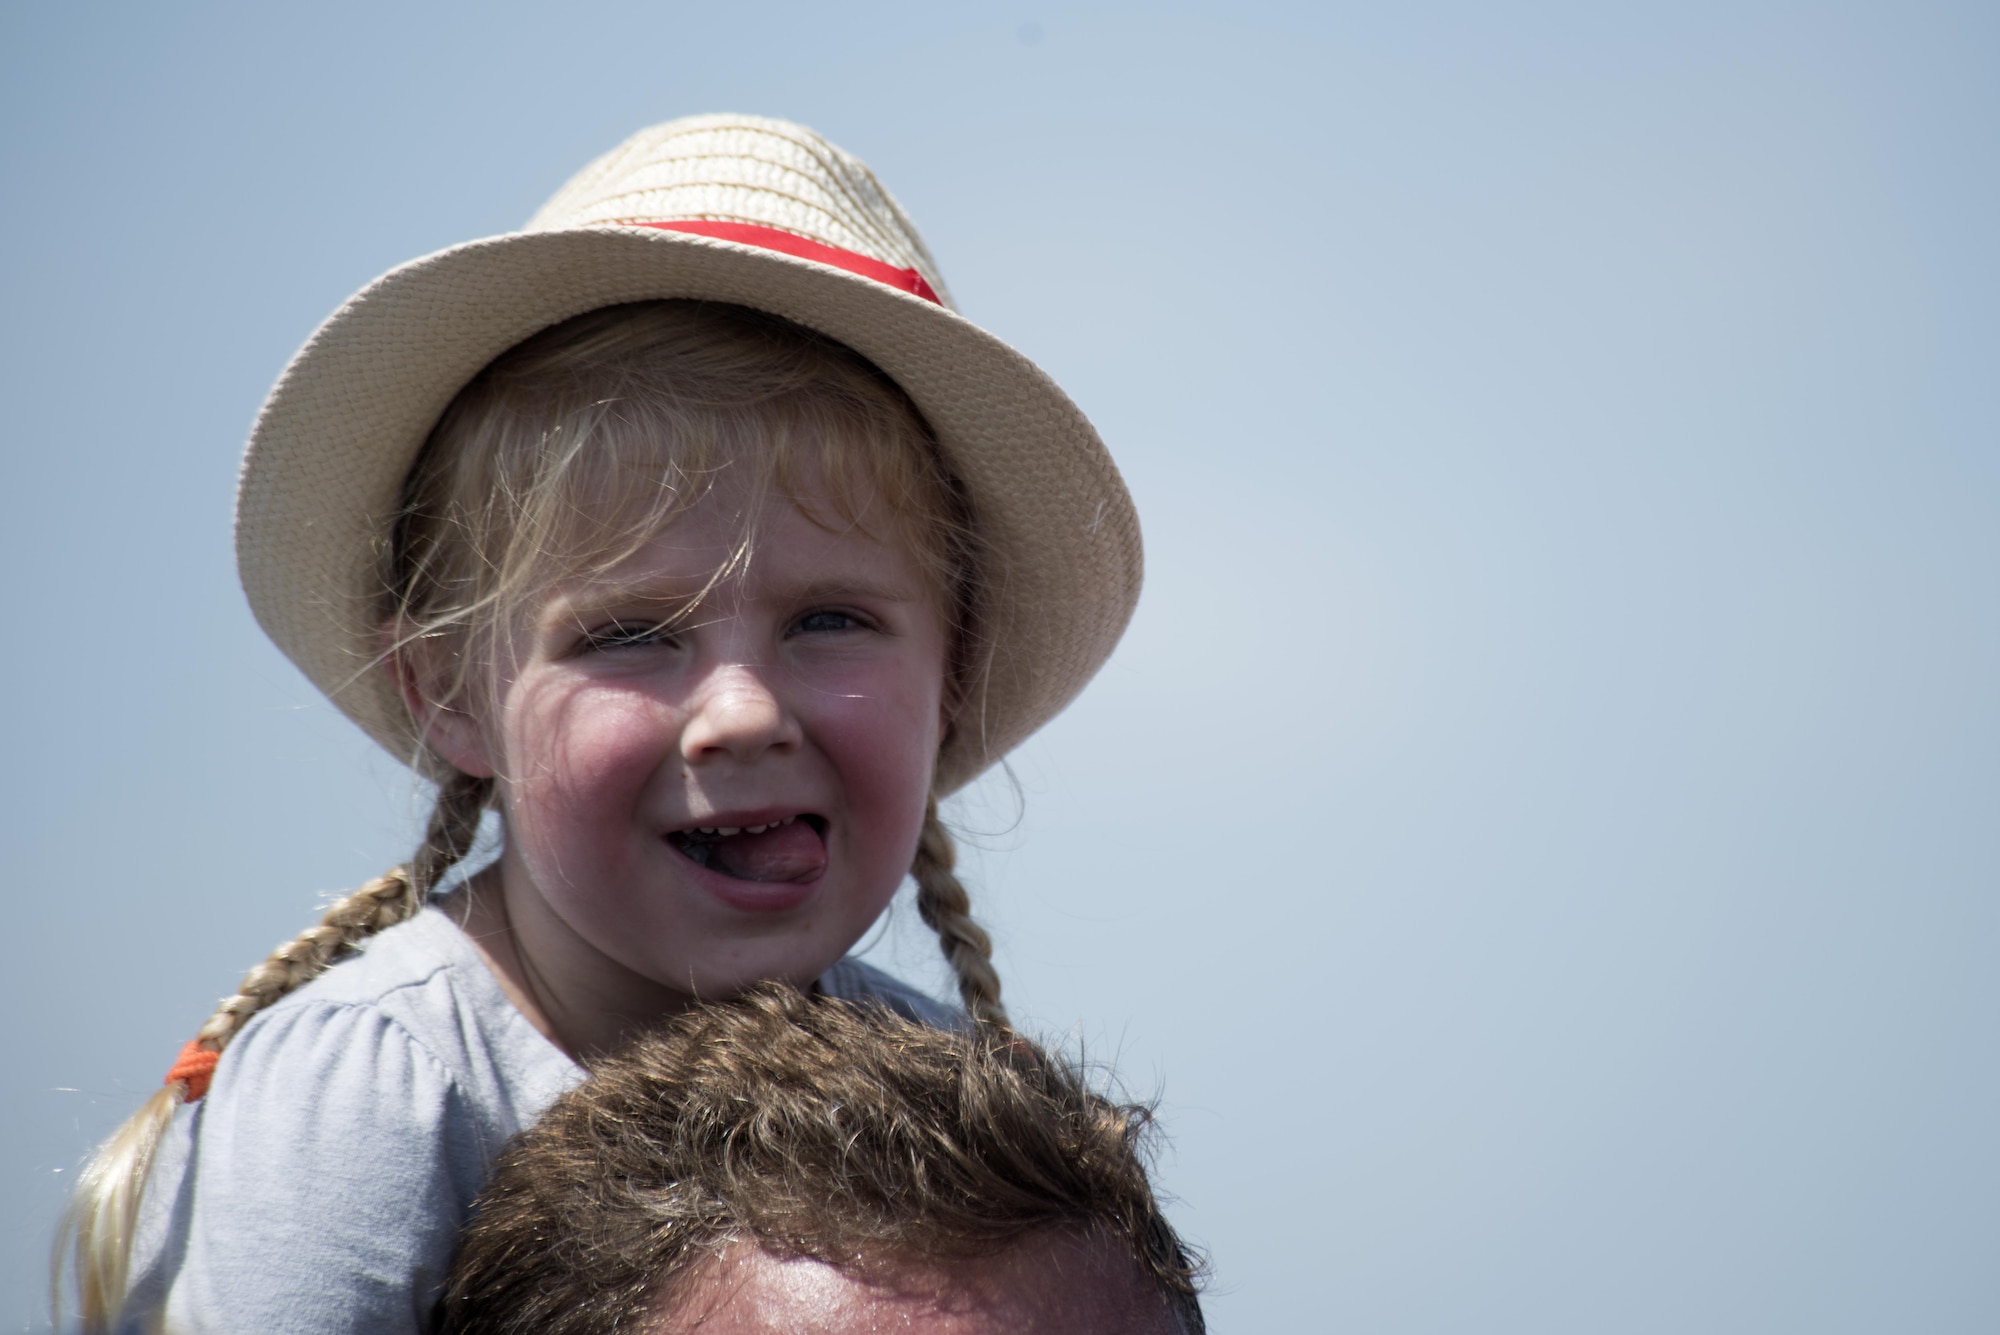 An attendee of the Wings Over Wayne Air Show prepares to watch aerial performances overhead, May 20, 2017, at Seymour Johnson Air Force Base, North Carolina. Seymour Johnson AFB opened its gates to the public for a free, two-day event as a way to thank local community members for their ongoing support of the base's mission. (U.S. Air Force photo by Airman Shawna L. Keyes)